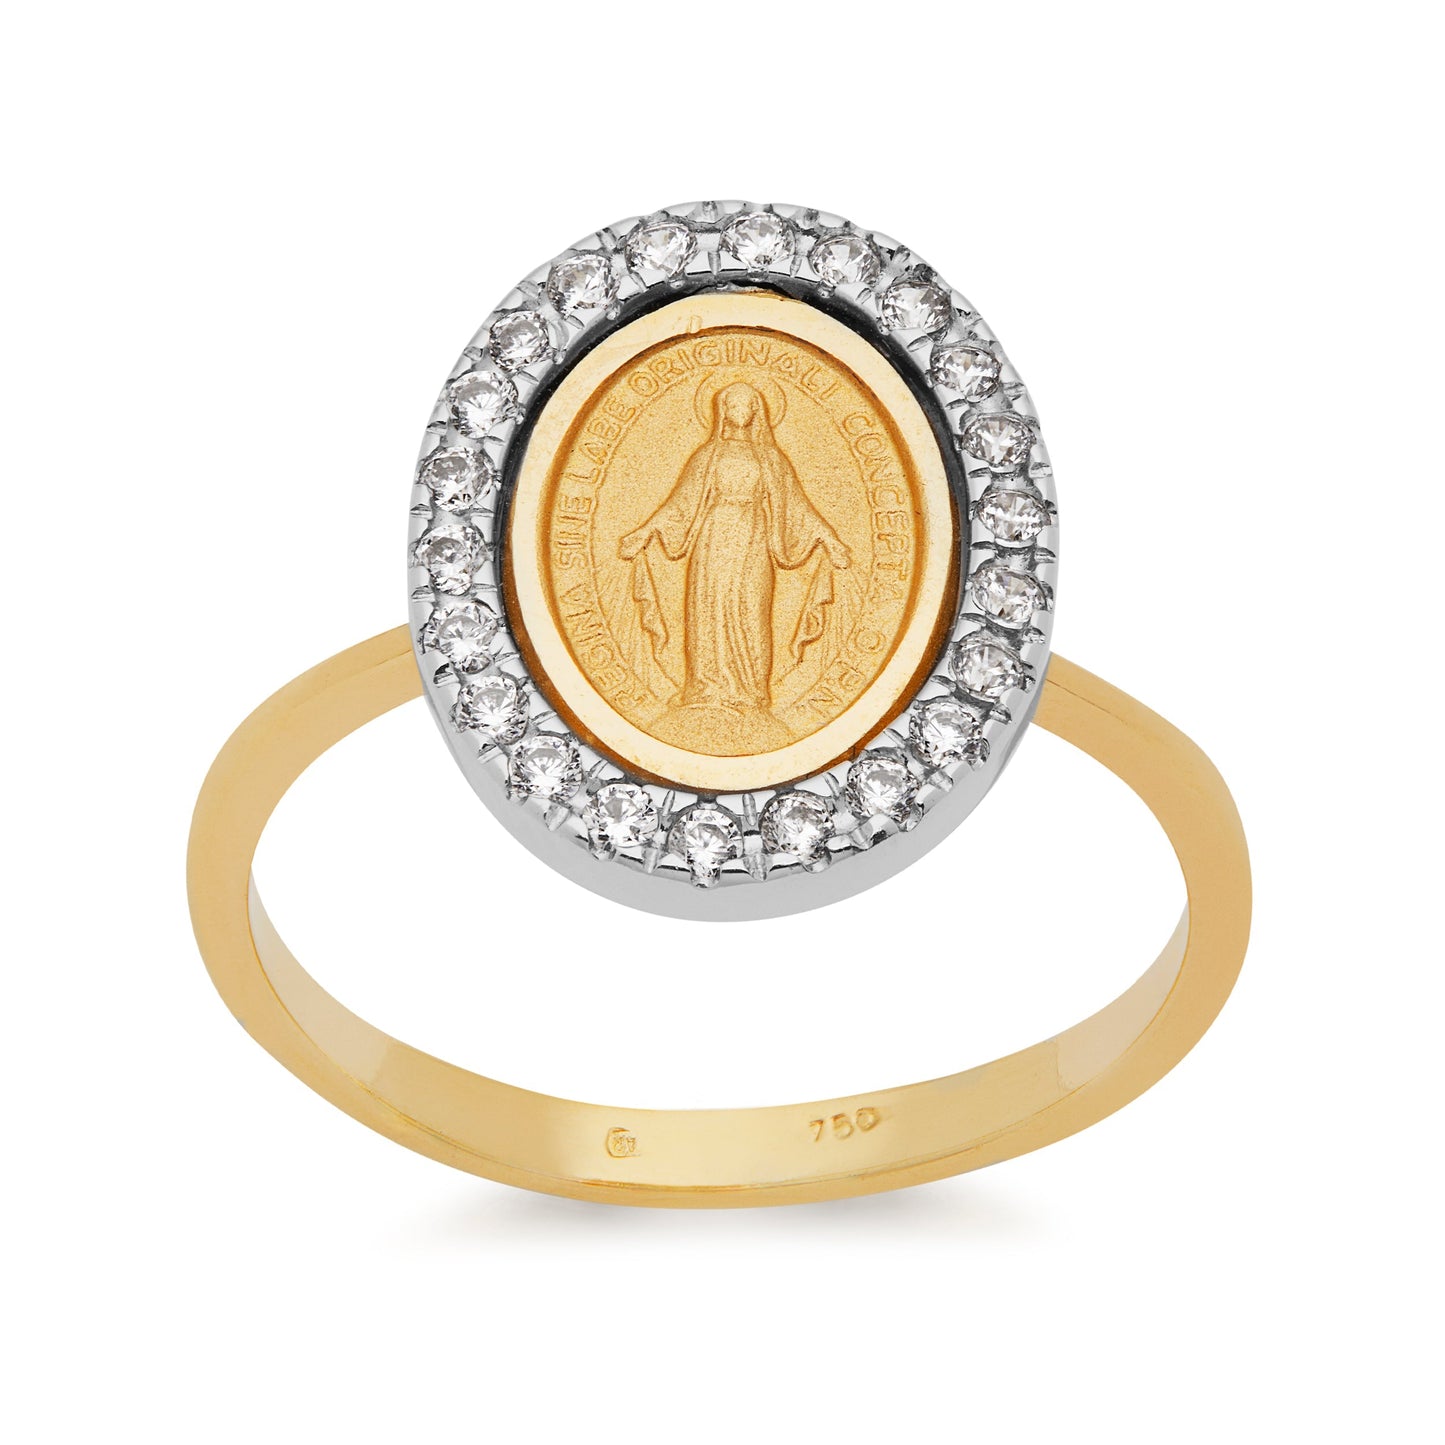 Mondo Cattolico Gold Ring With Miraculous Medal With White Gold and Cubic Zirconia Details